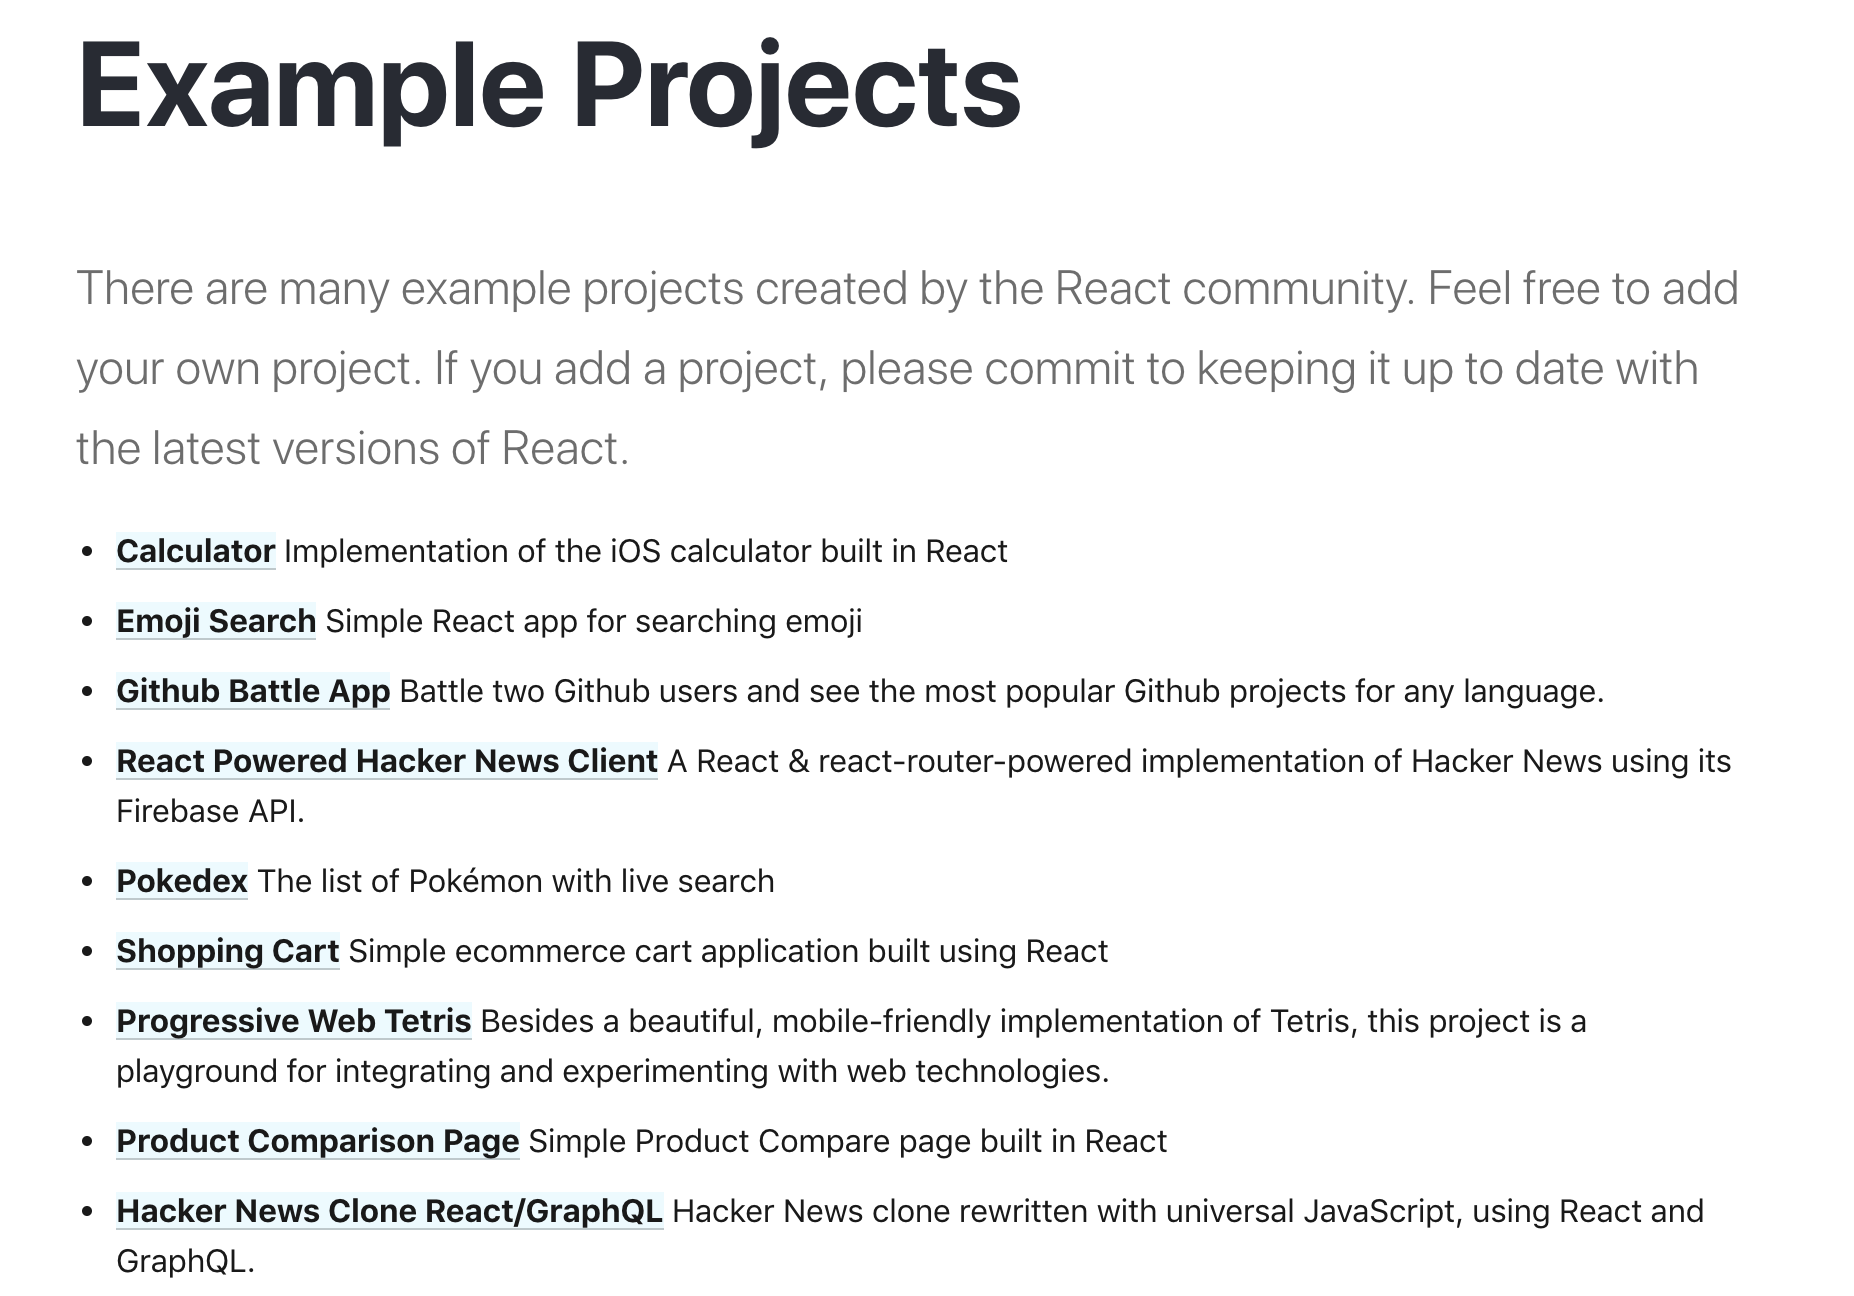 ReactJS.org Project Examples